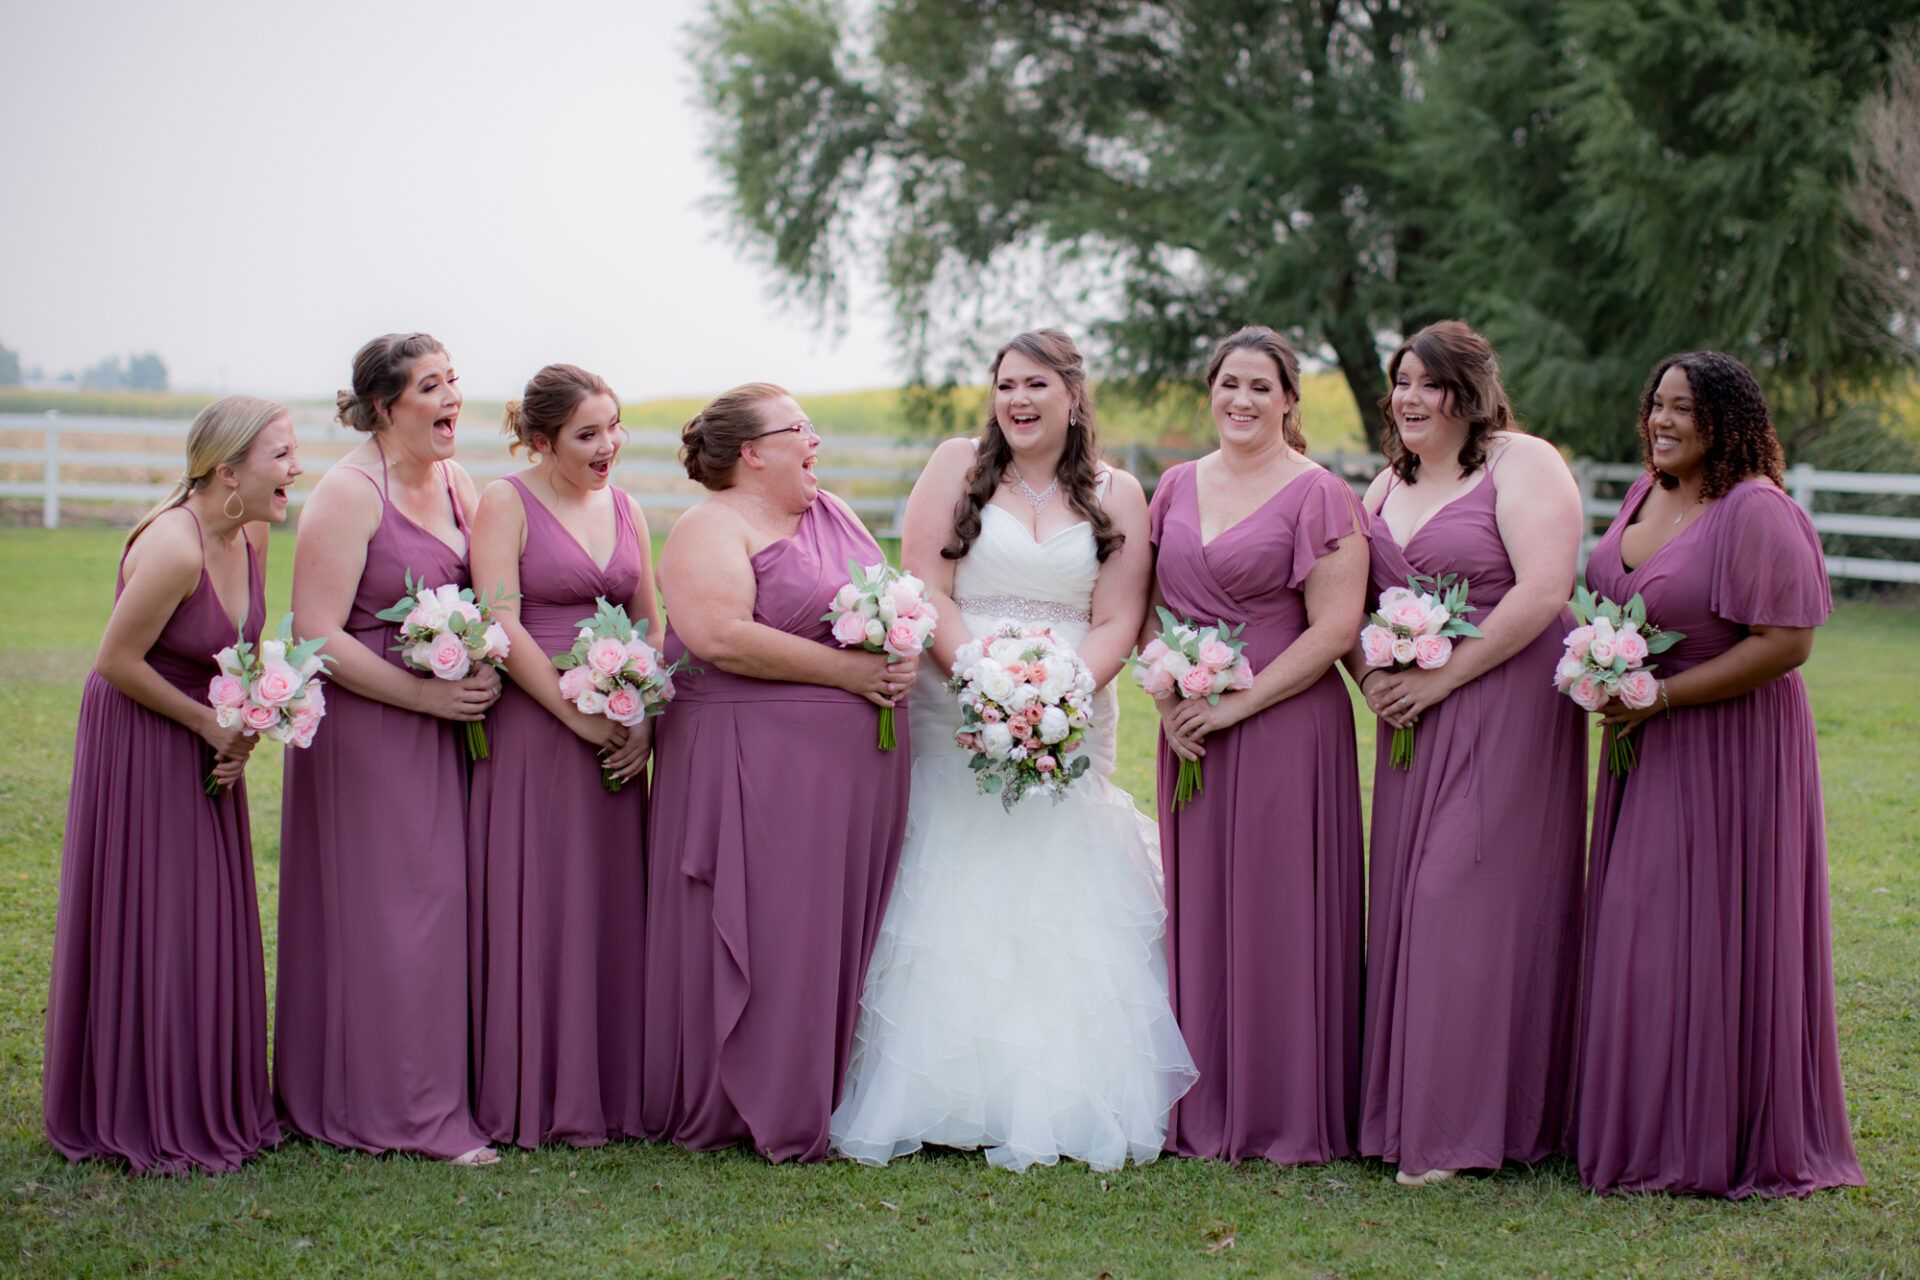 Happy bride in between her bridesmaid who are wearing lavender dresses